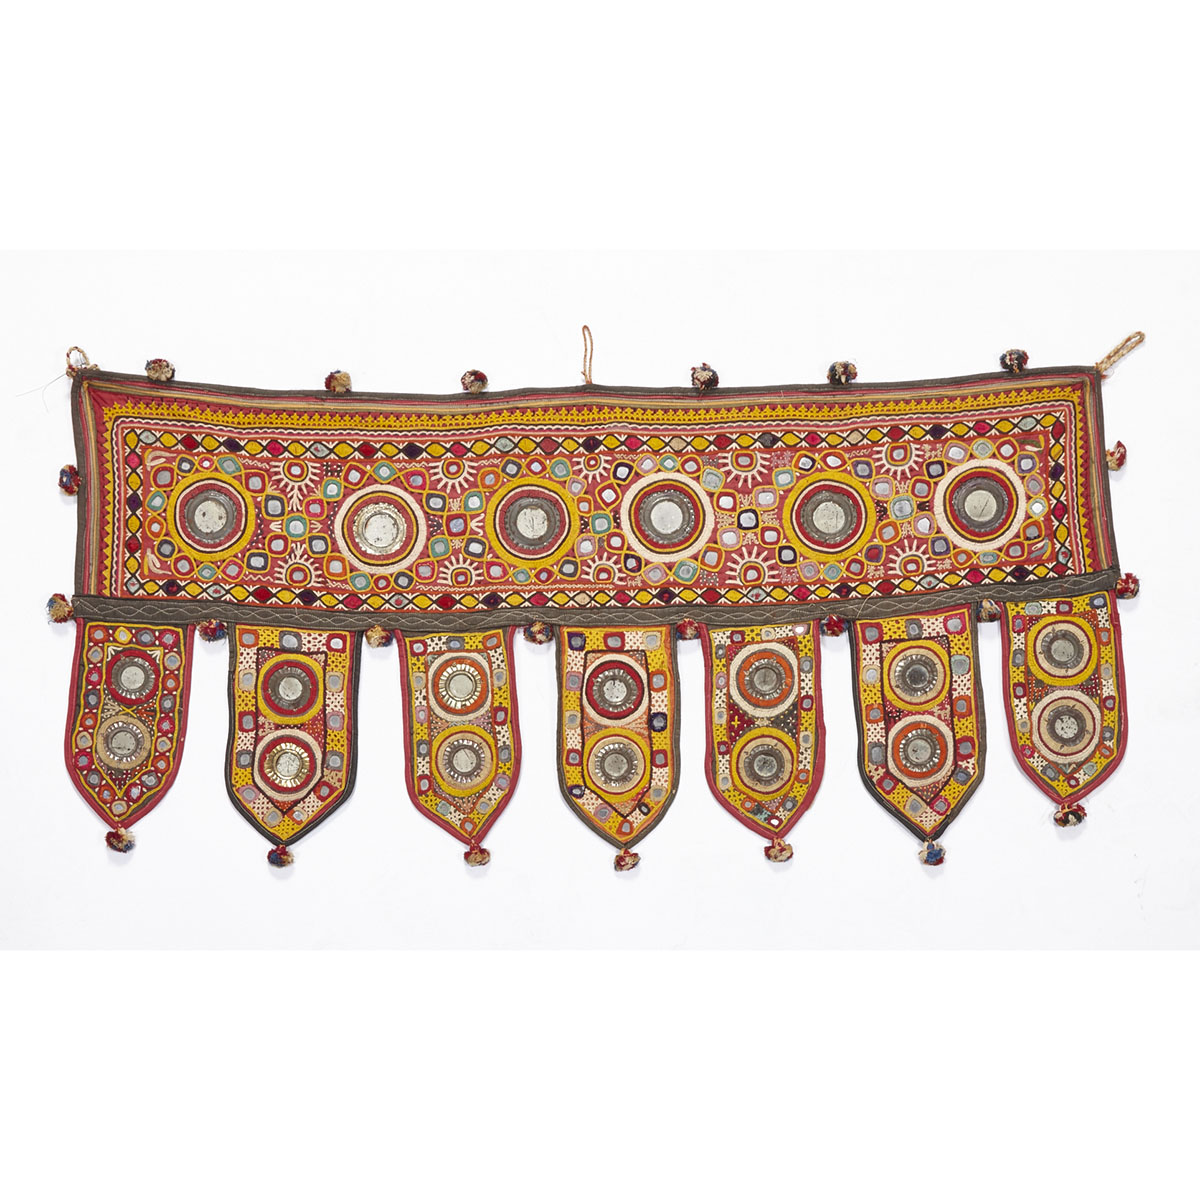 Uzbek Tent or Animal Trapping, early 20th century